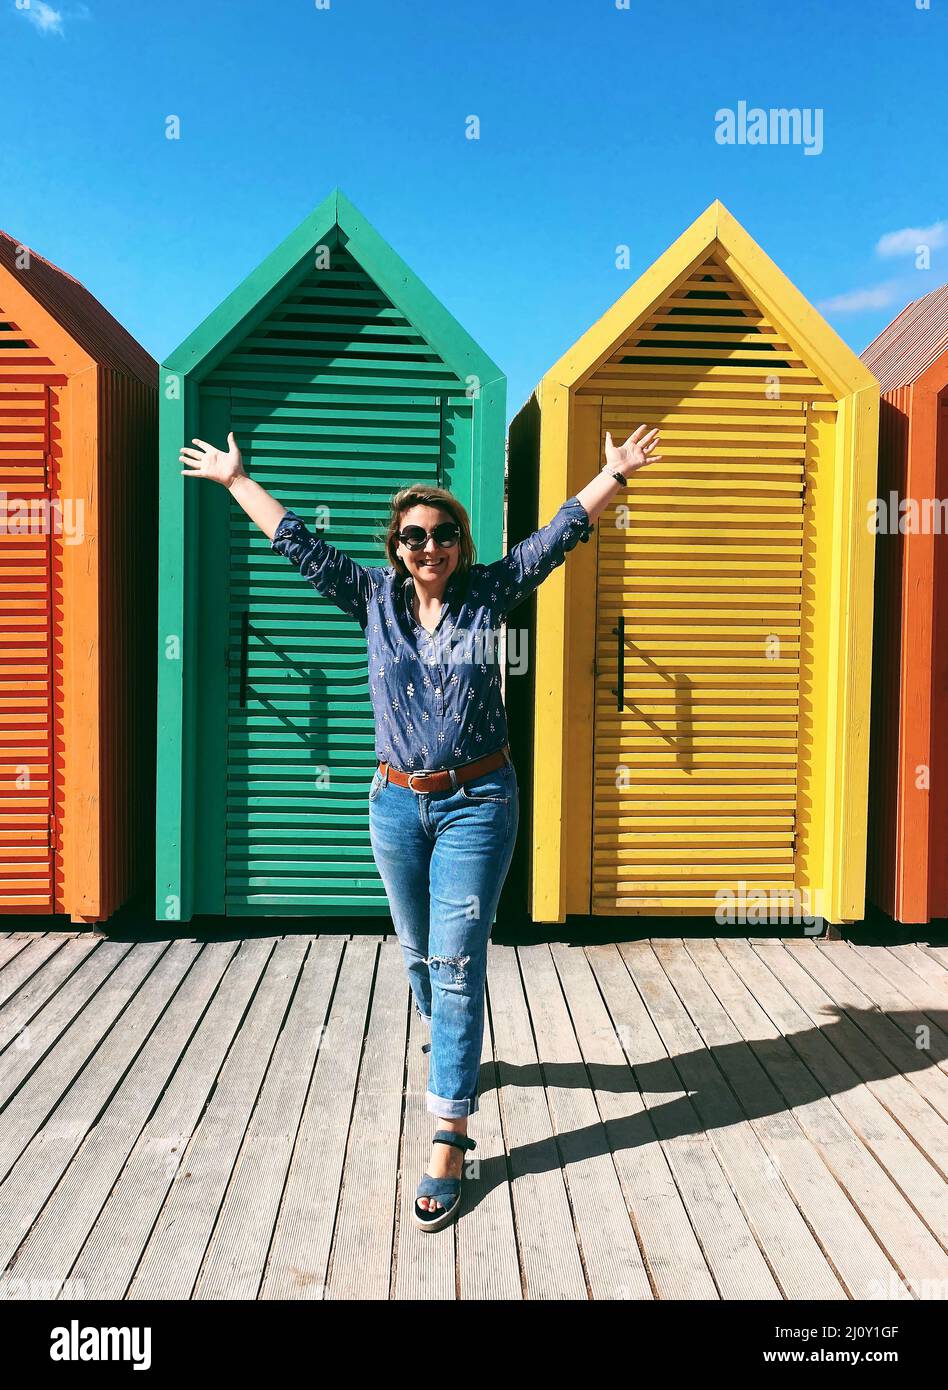 Happy young woman raising hands and smiling while standing against colourful wooden beach cabins Stock Photo